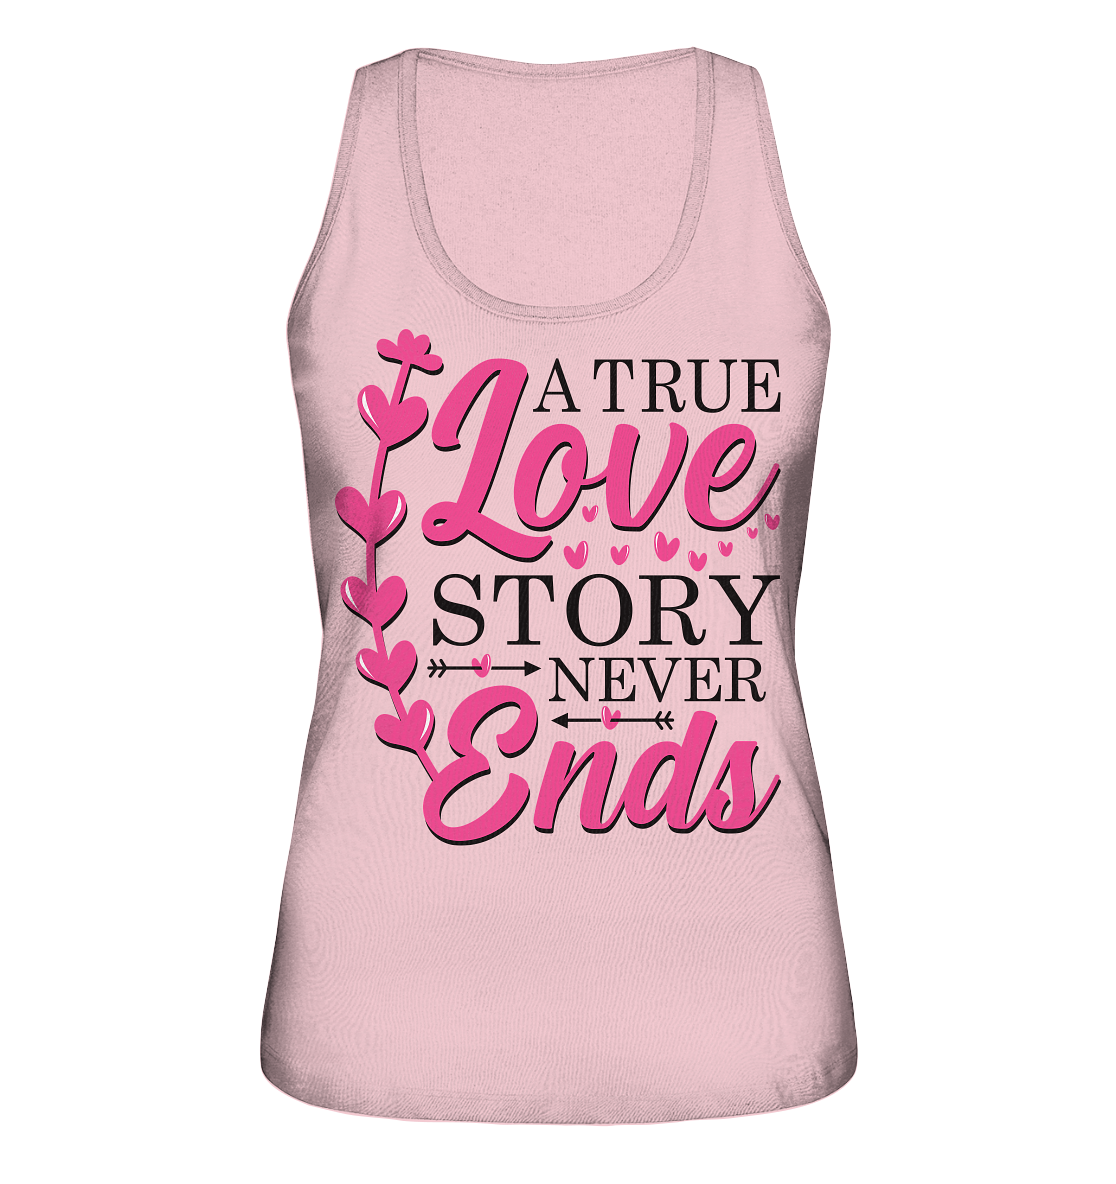 A True Love Story Never Ends - Ladies Organic Tank-Top